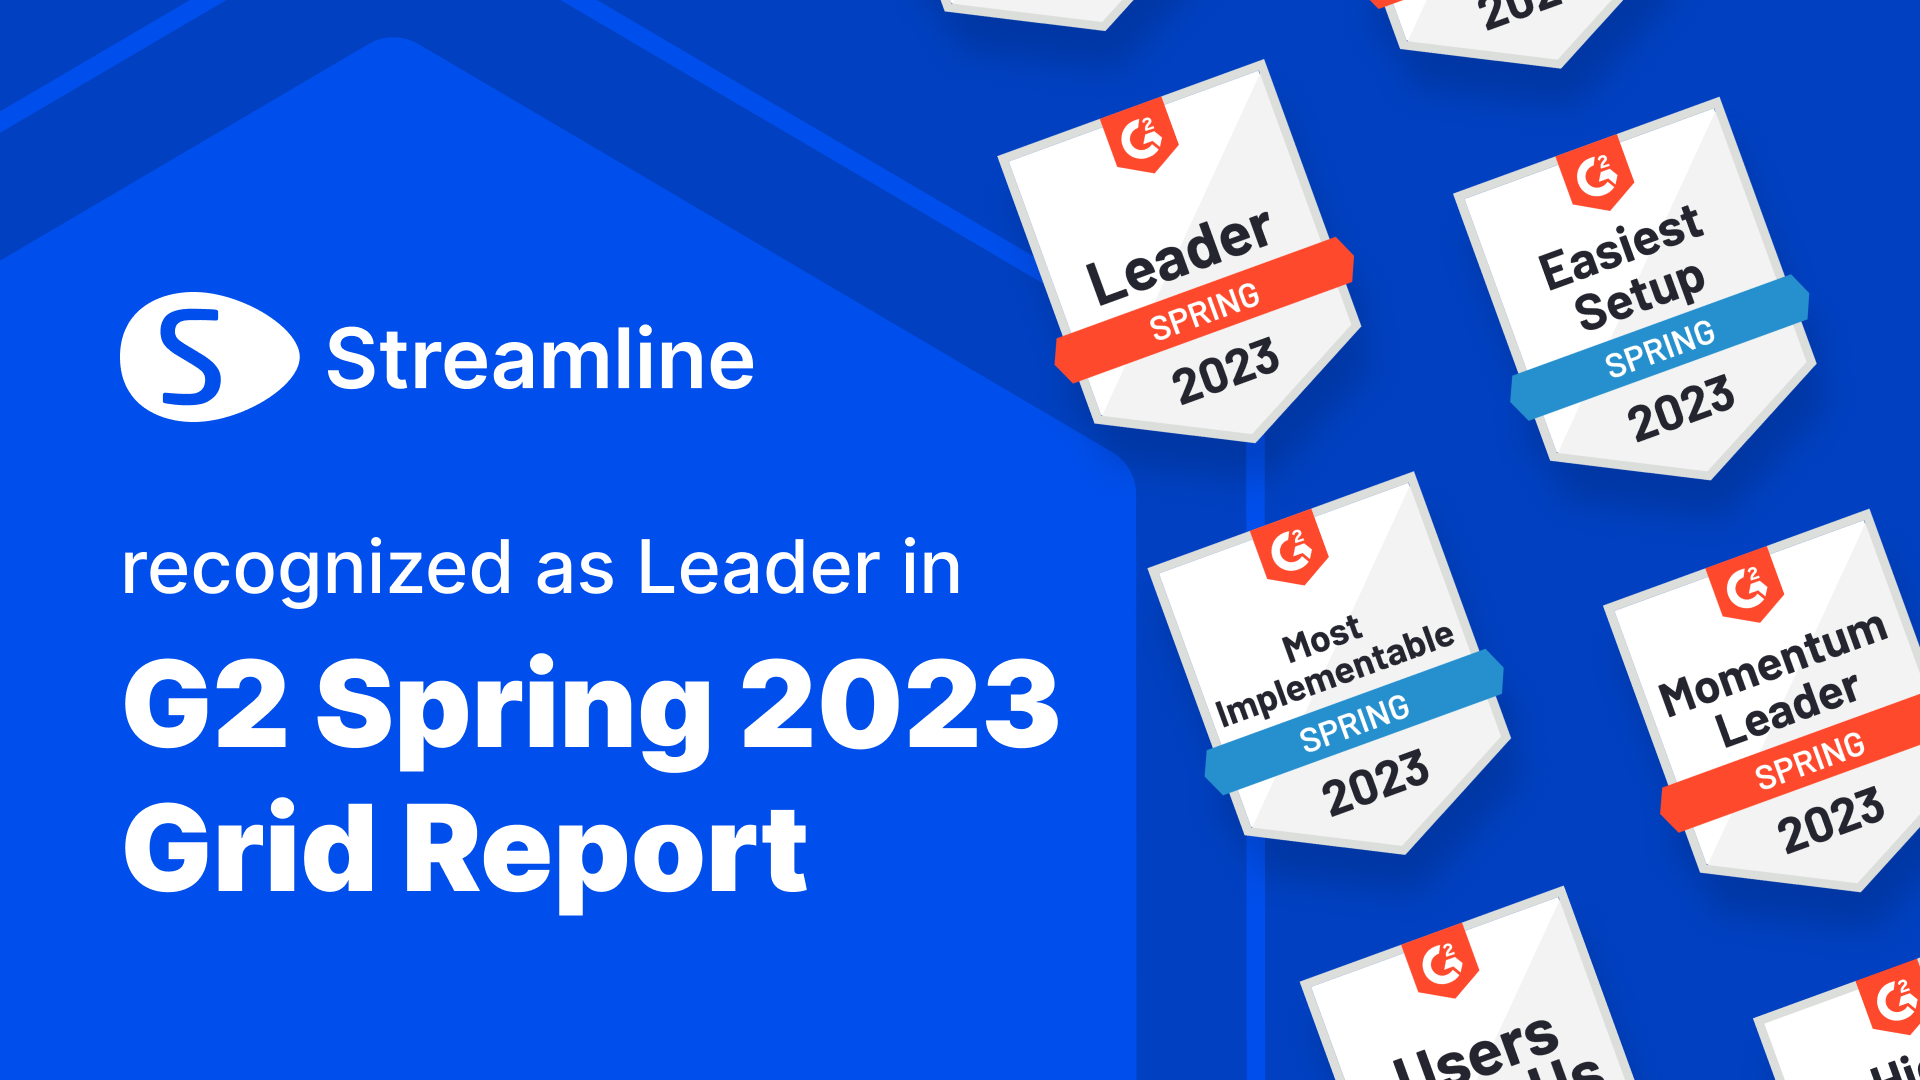 Streamline recognized as Leader in G2 Spring 2023 Grid Report